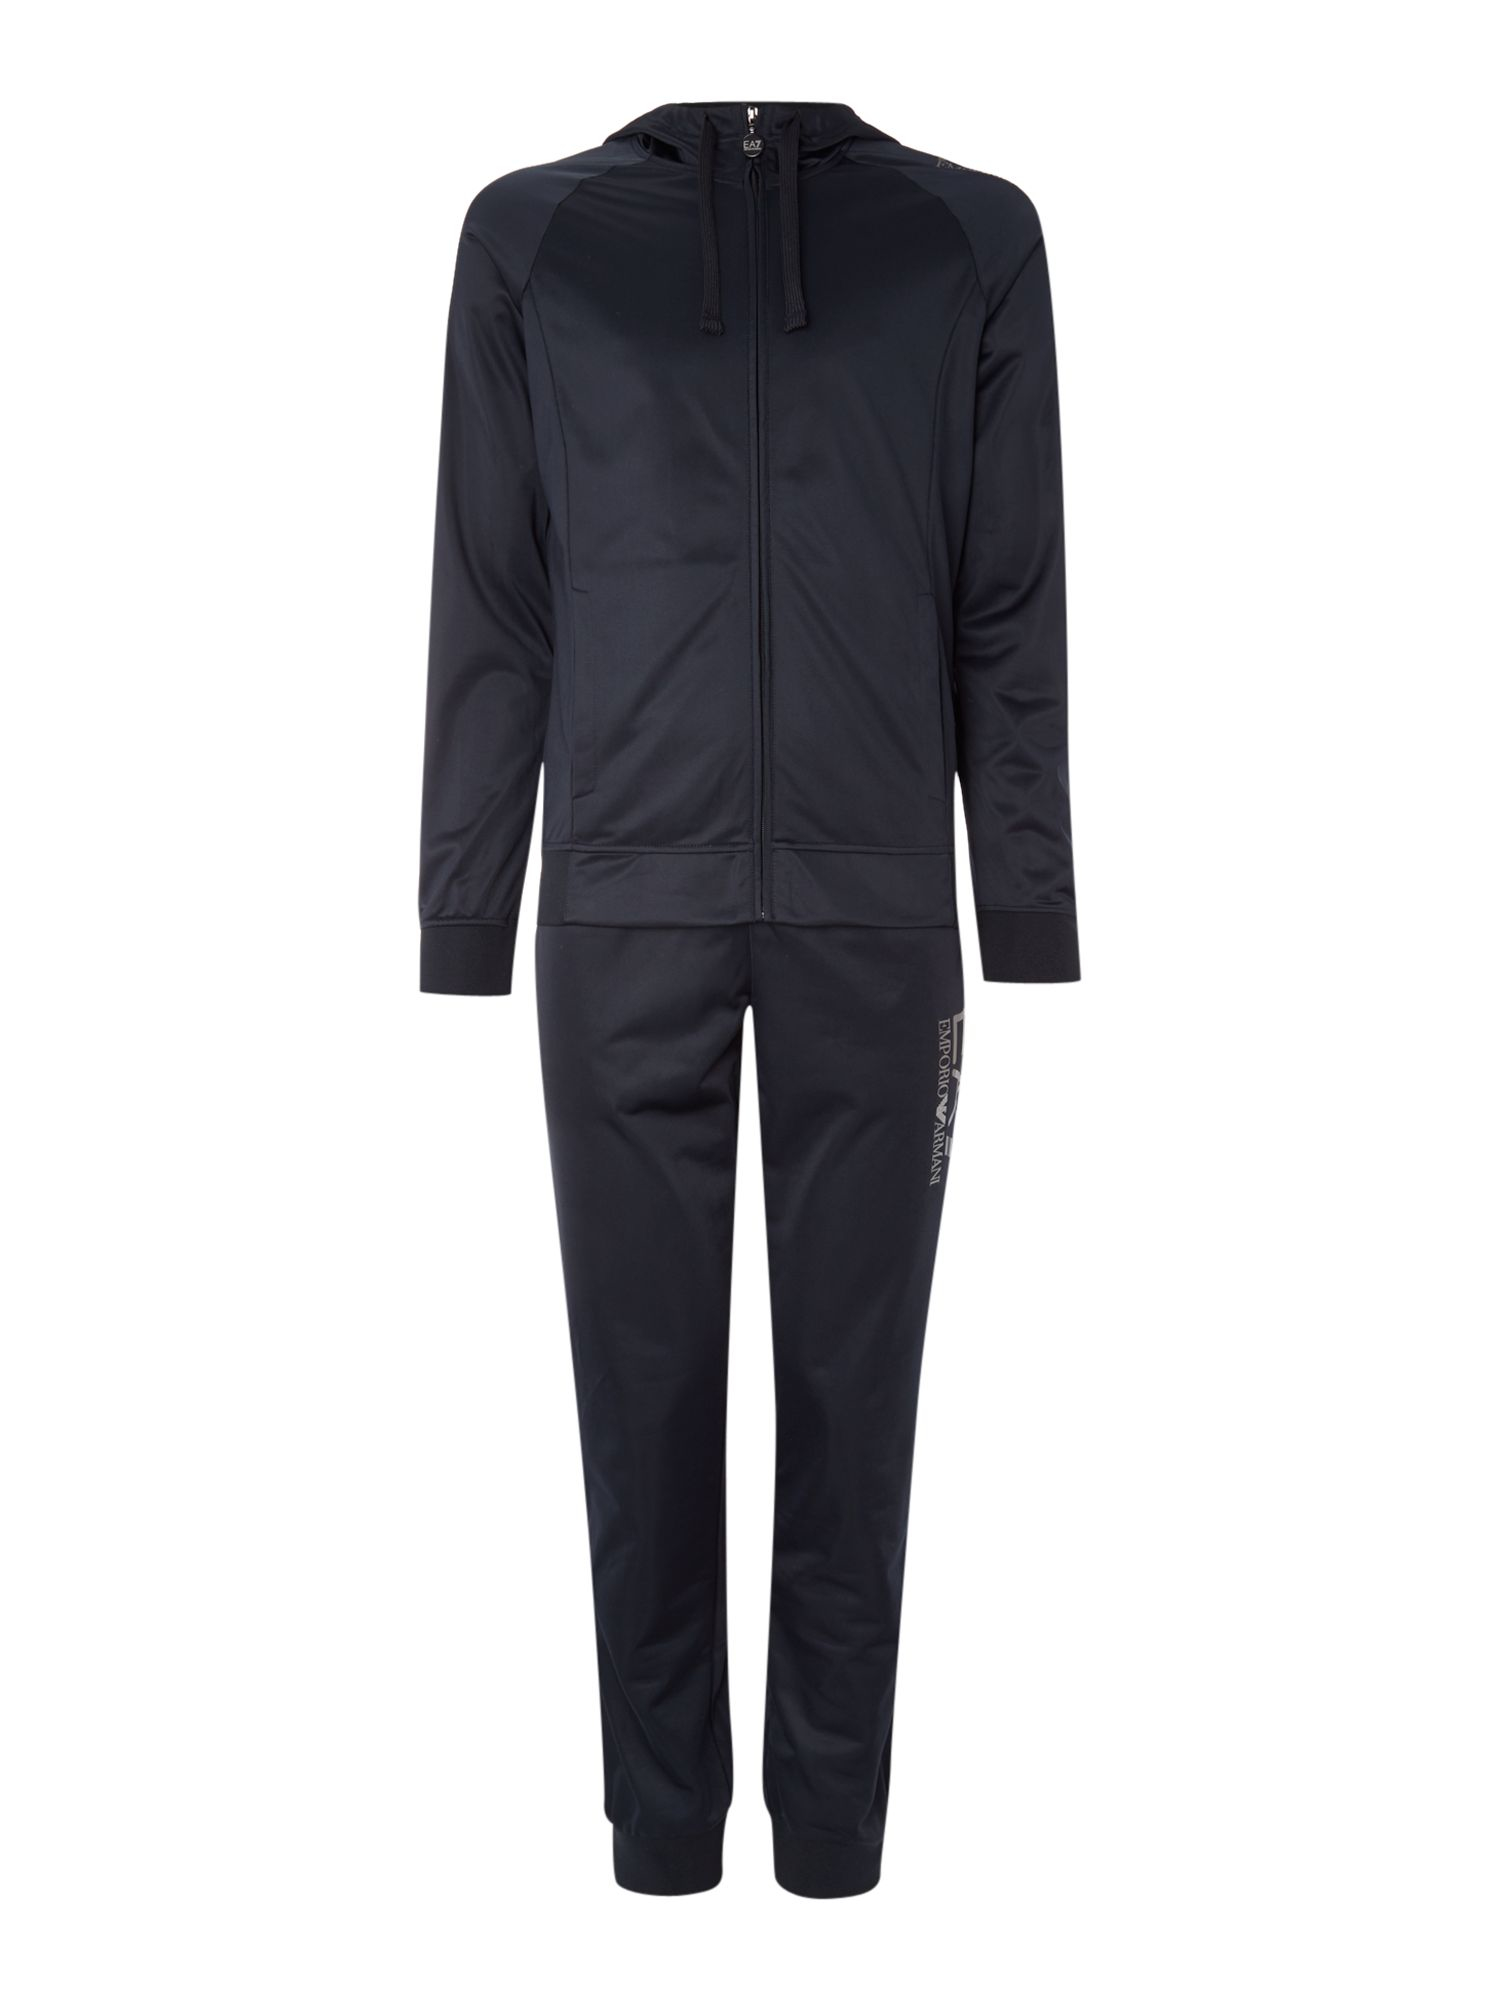 EA7 Plain Tracksuit With Zip Fastening in Navy (Blue) for Men - Lyst